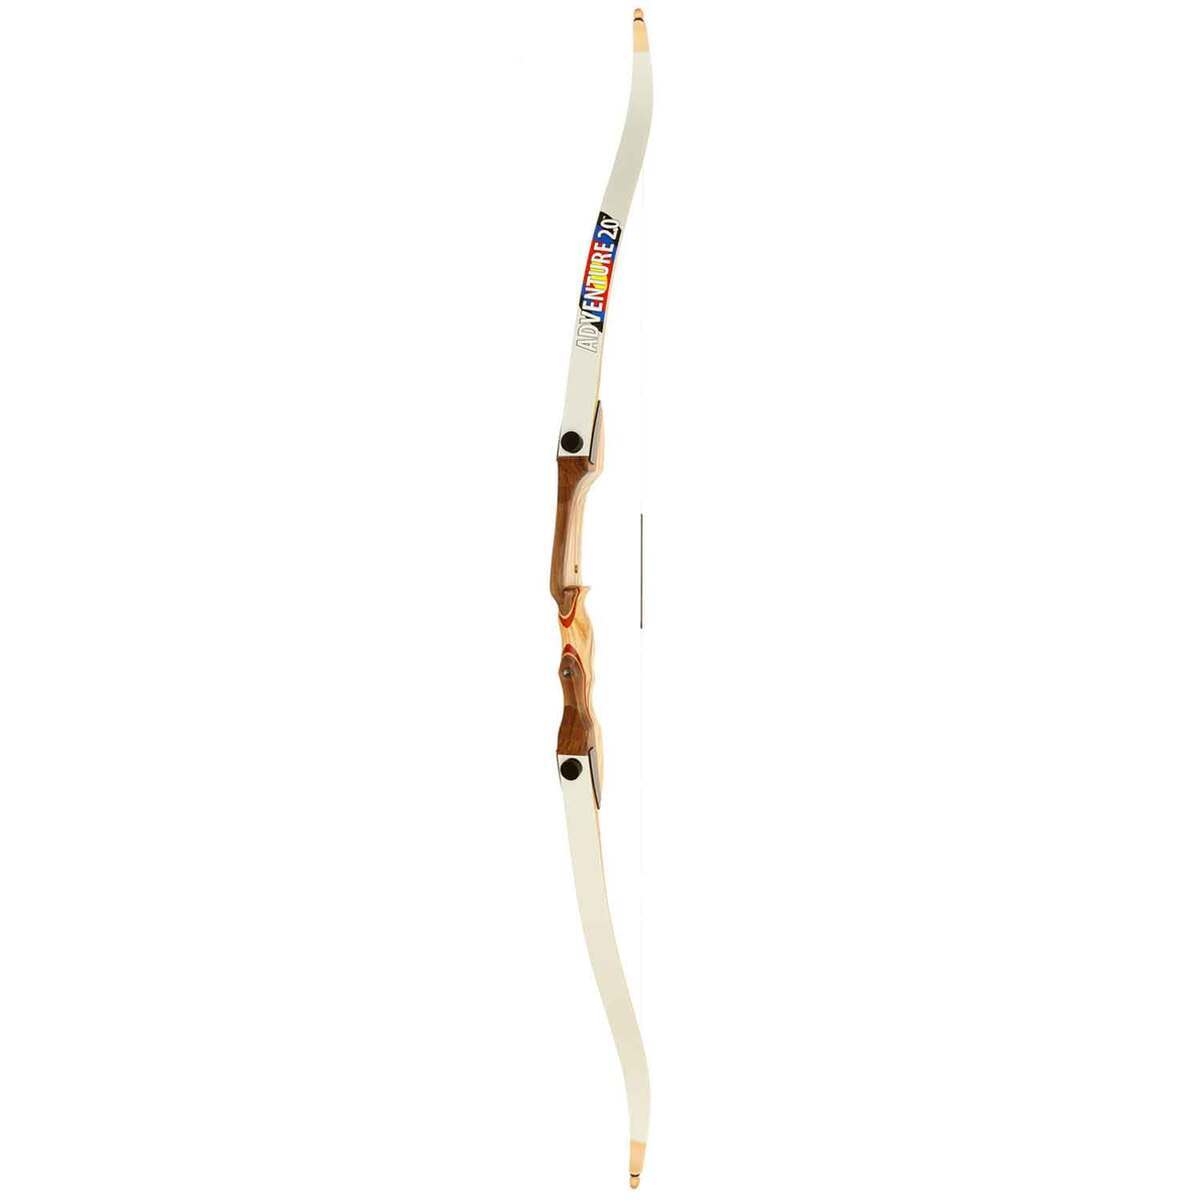 40-60LBS Archery Recurve Bow Folding Bow Easy to Carry For Outdoor Shooting